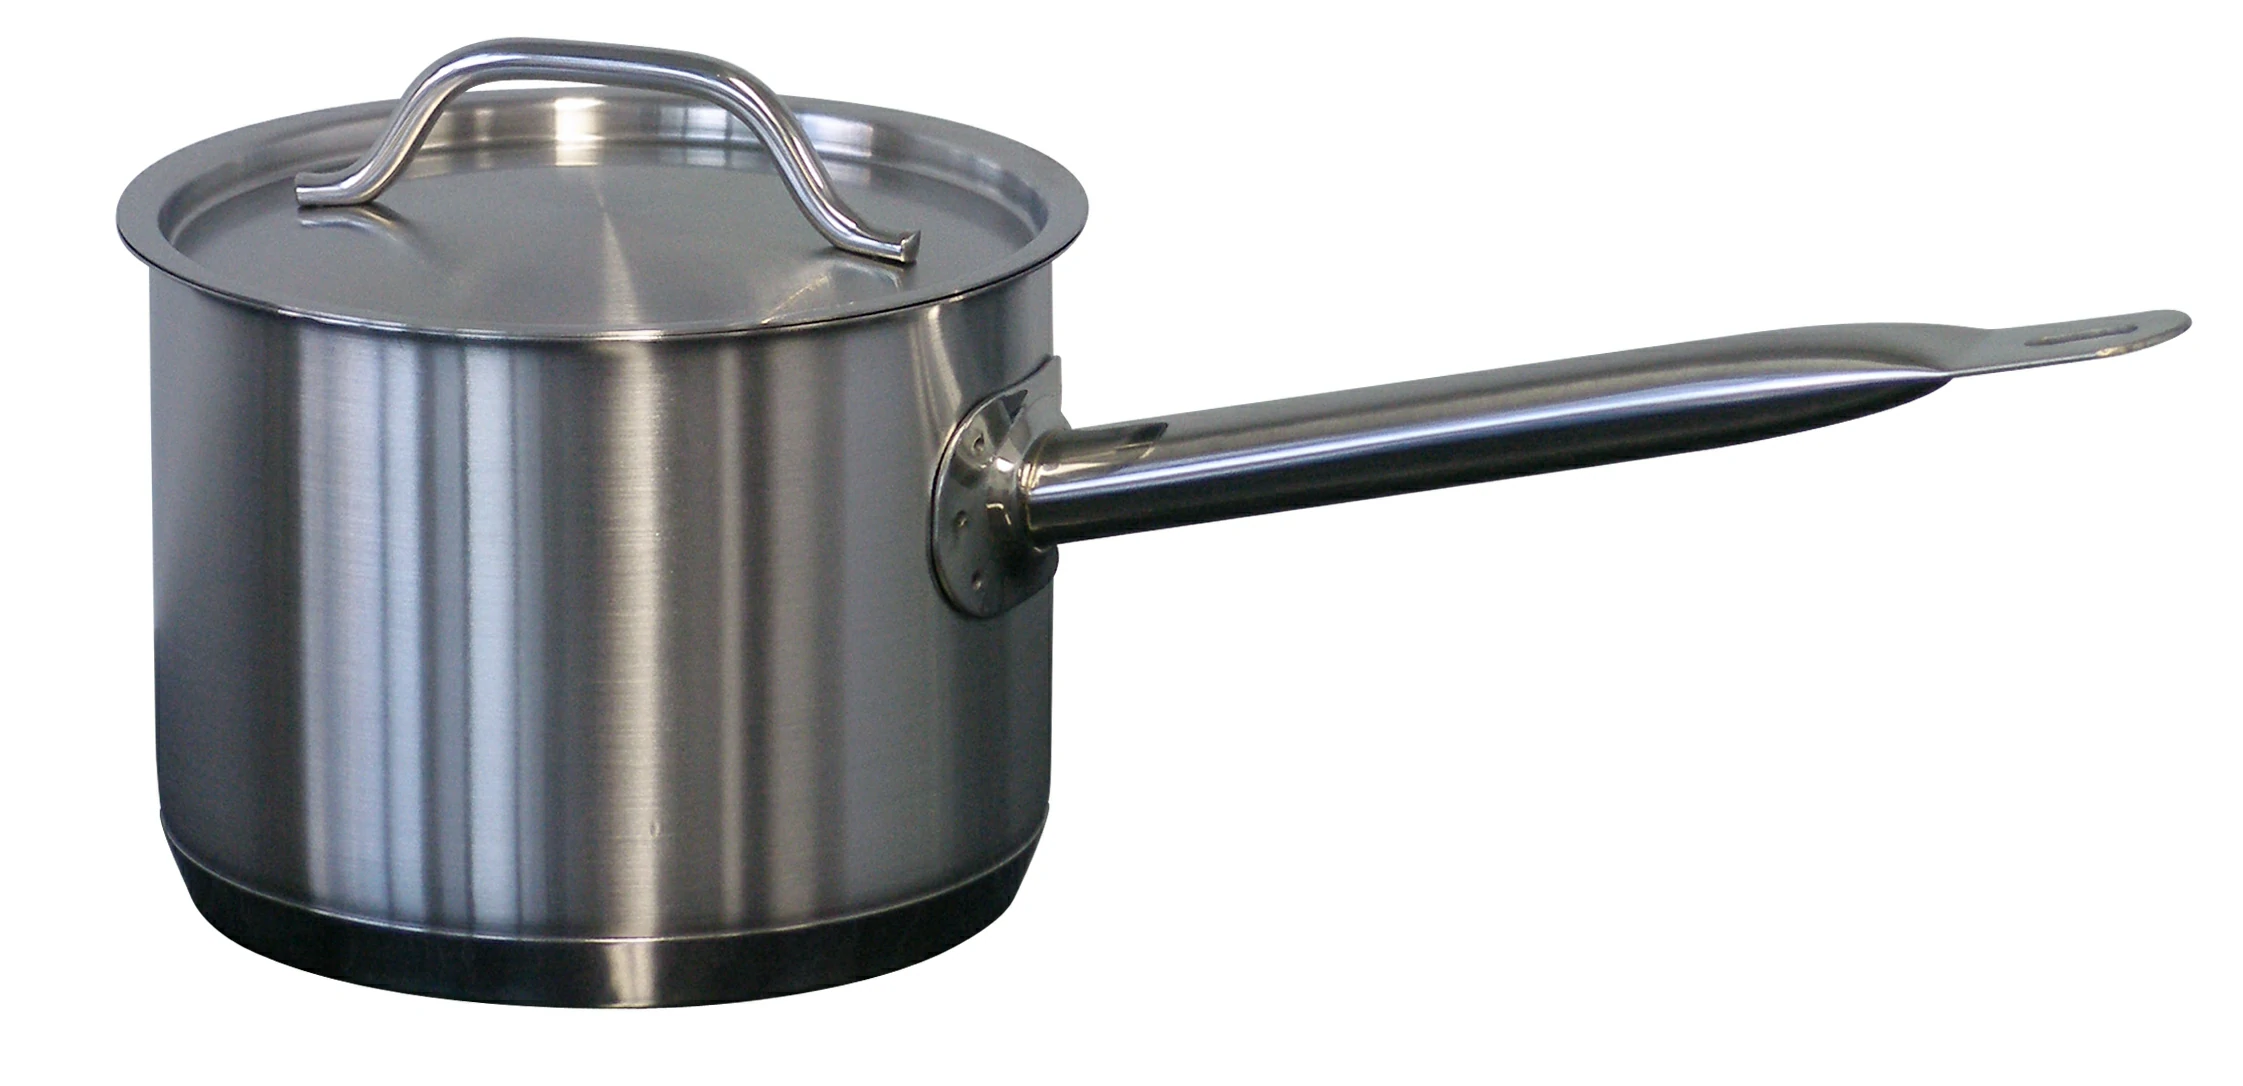 Forje SH2 Stainless steel 2.4 litre high saucepan